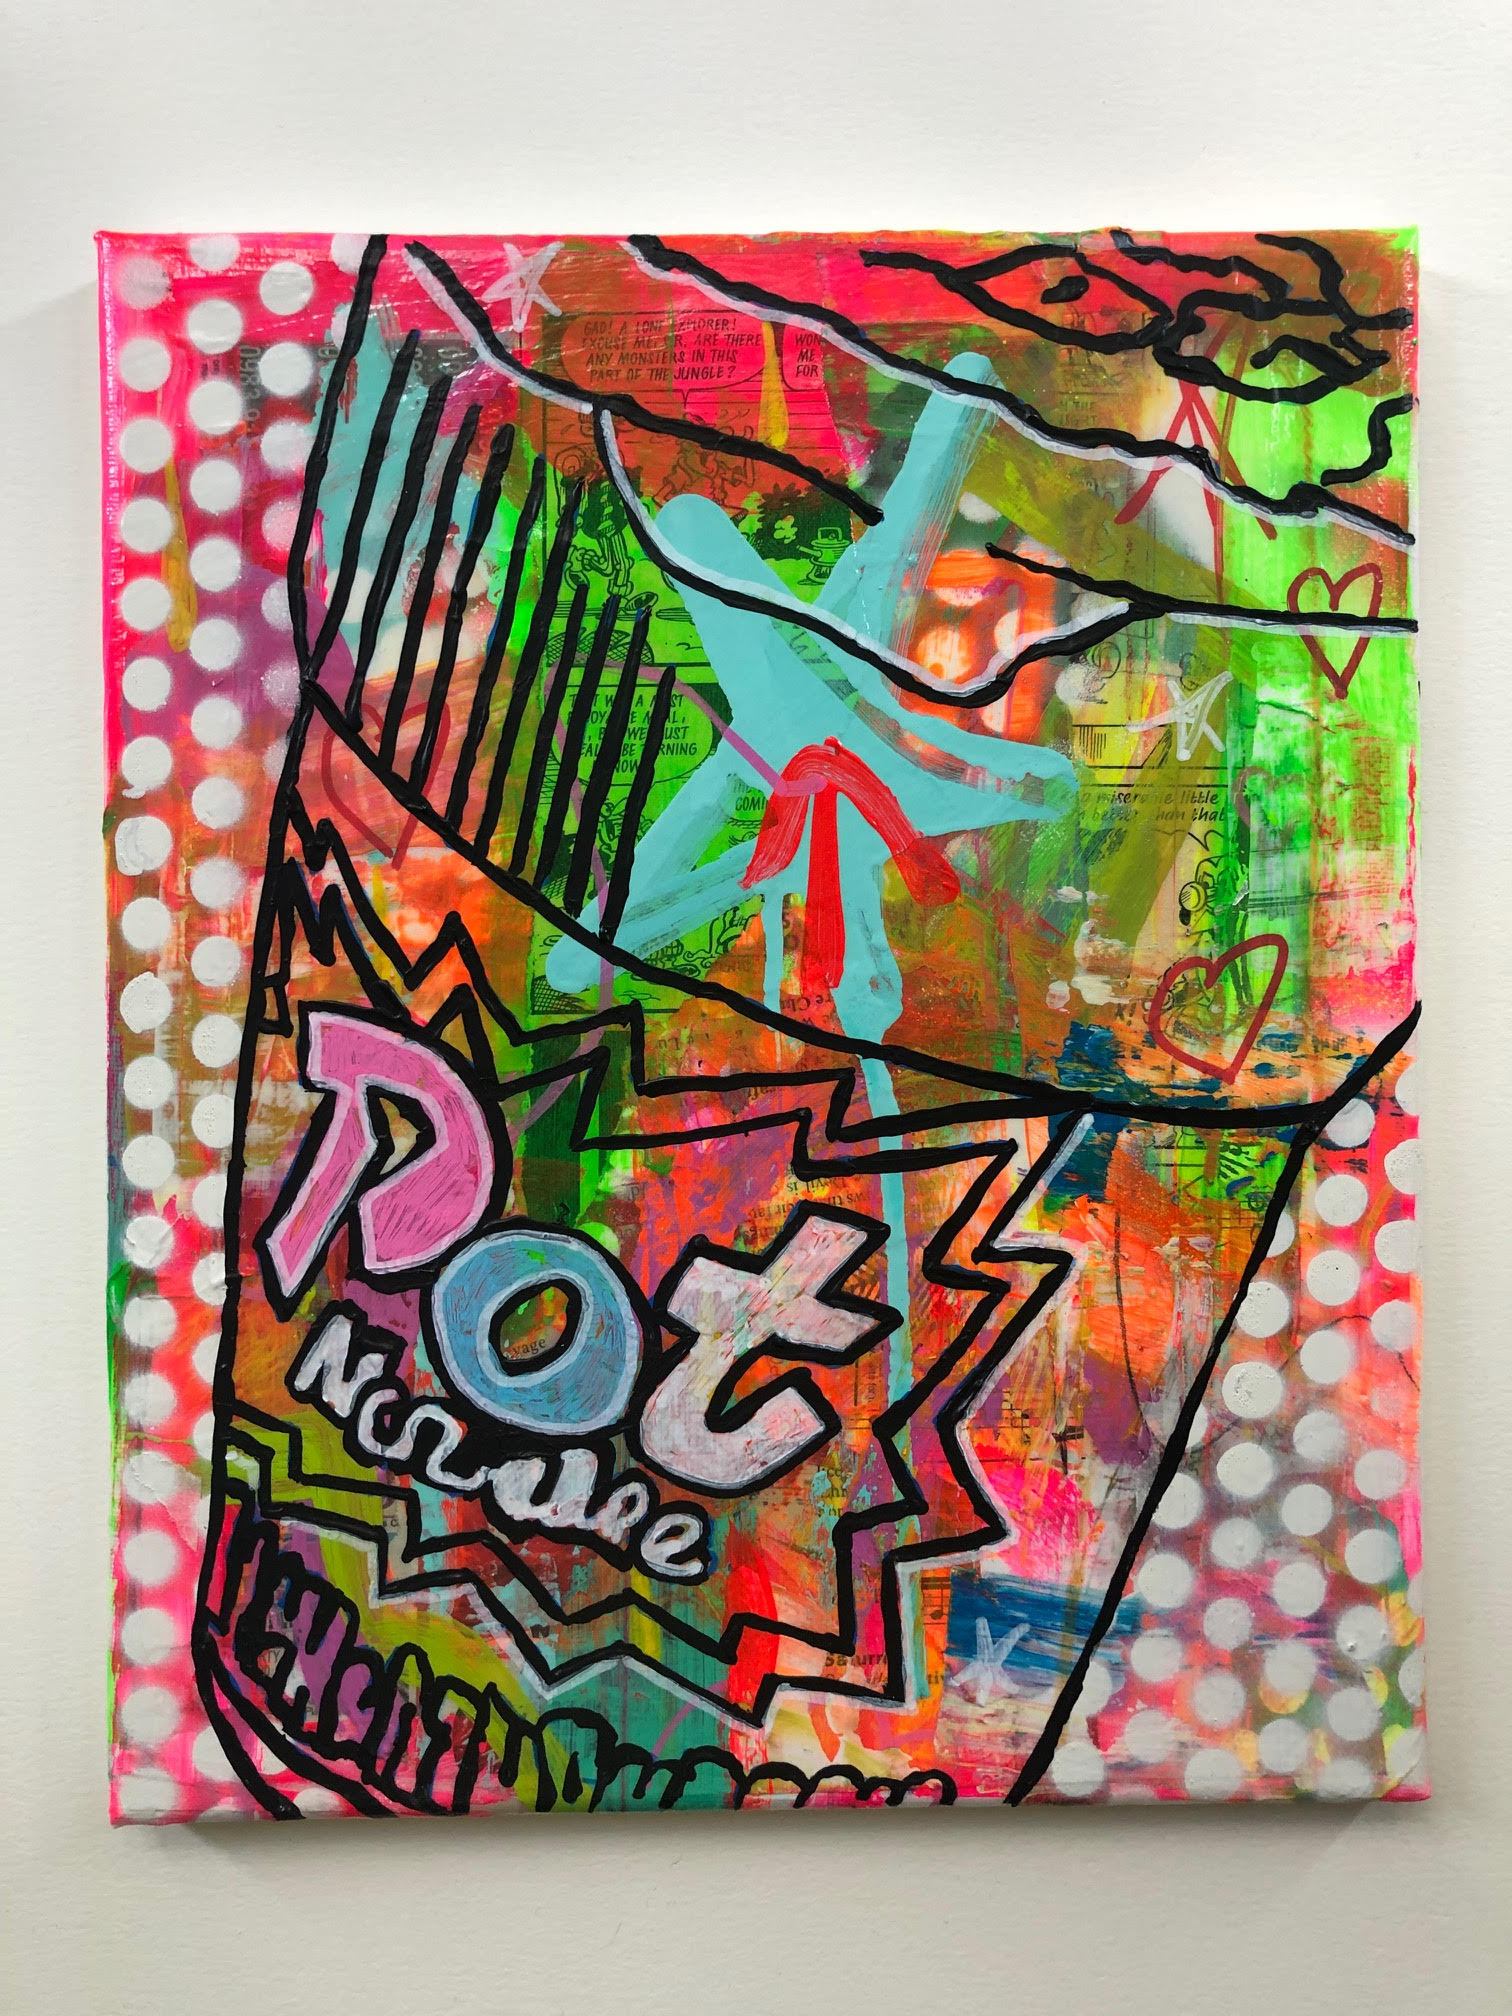 Dotty Pot Noodlism by Barrie J Davies 2019, mixed media on canvas, 25cm x 30 cm, unframed. Barrie J Davies is an Artist - Pop Art and Street art inspired Artist based in Brighton England UK - Pop Art Paintings, Street Art Prints & Editions available. 